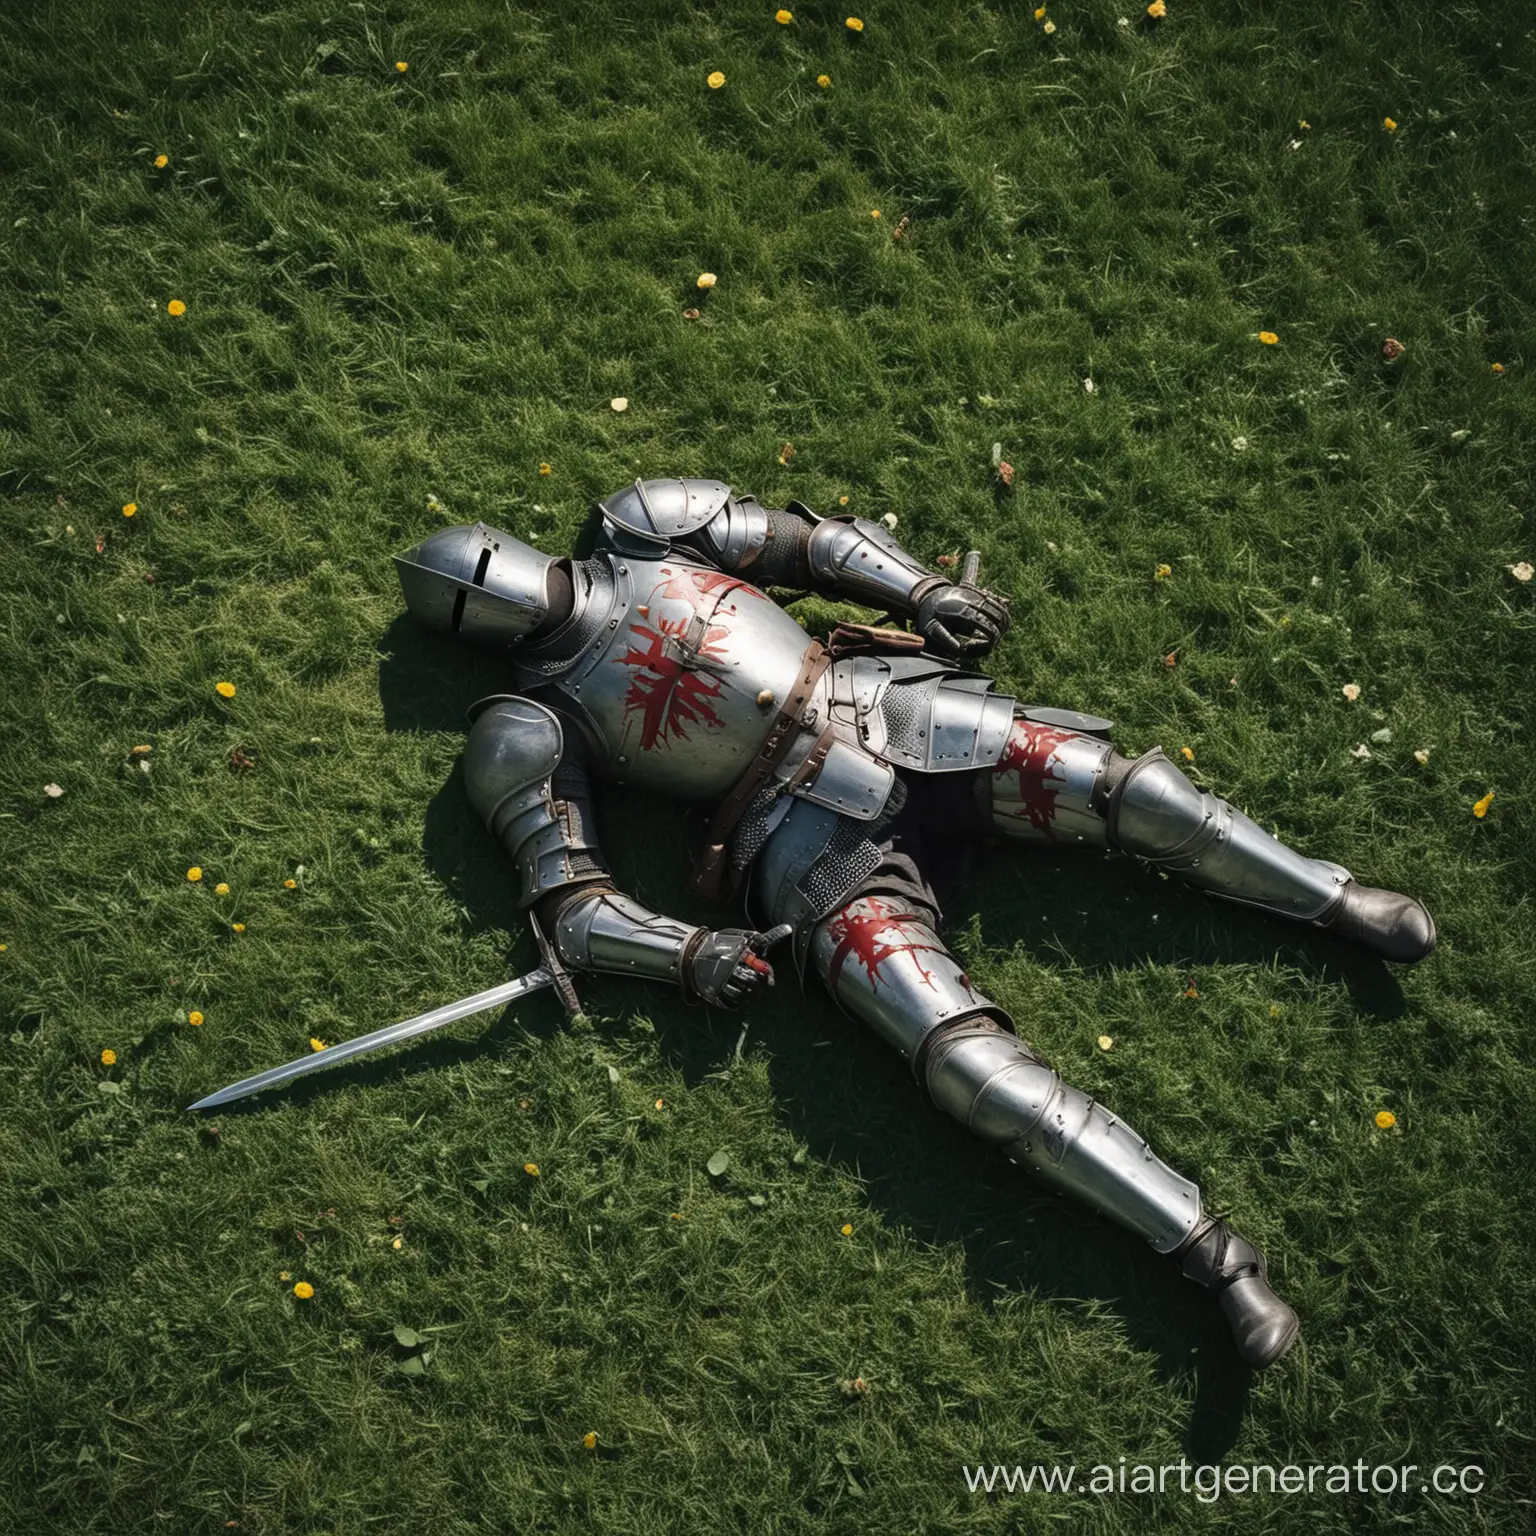 Wounded-Knight-Resting-on-Grass